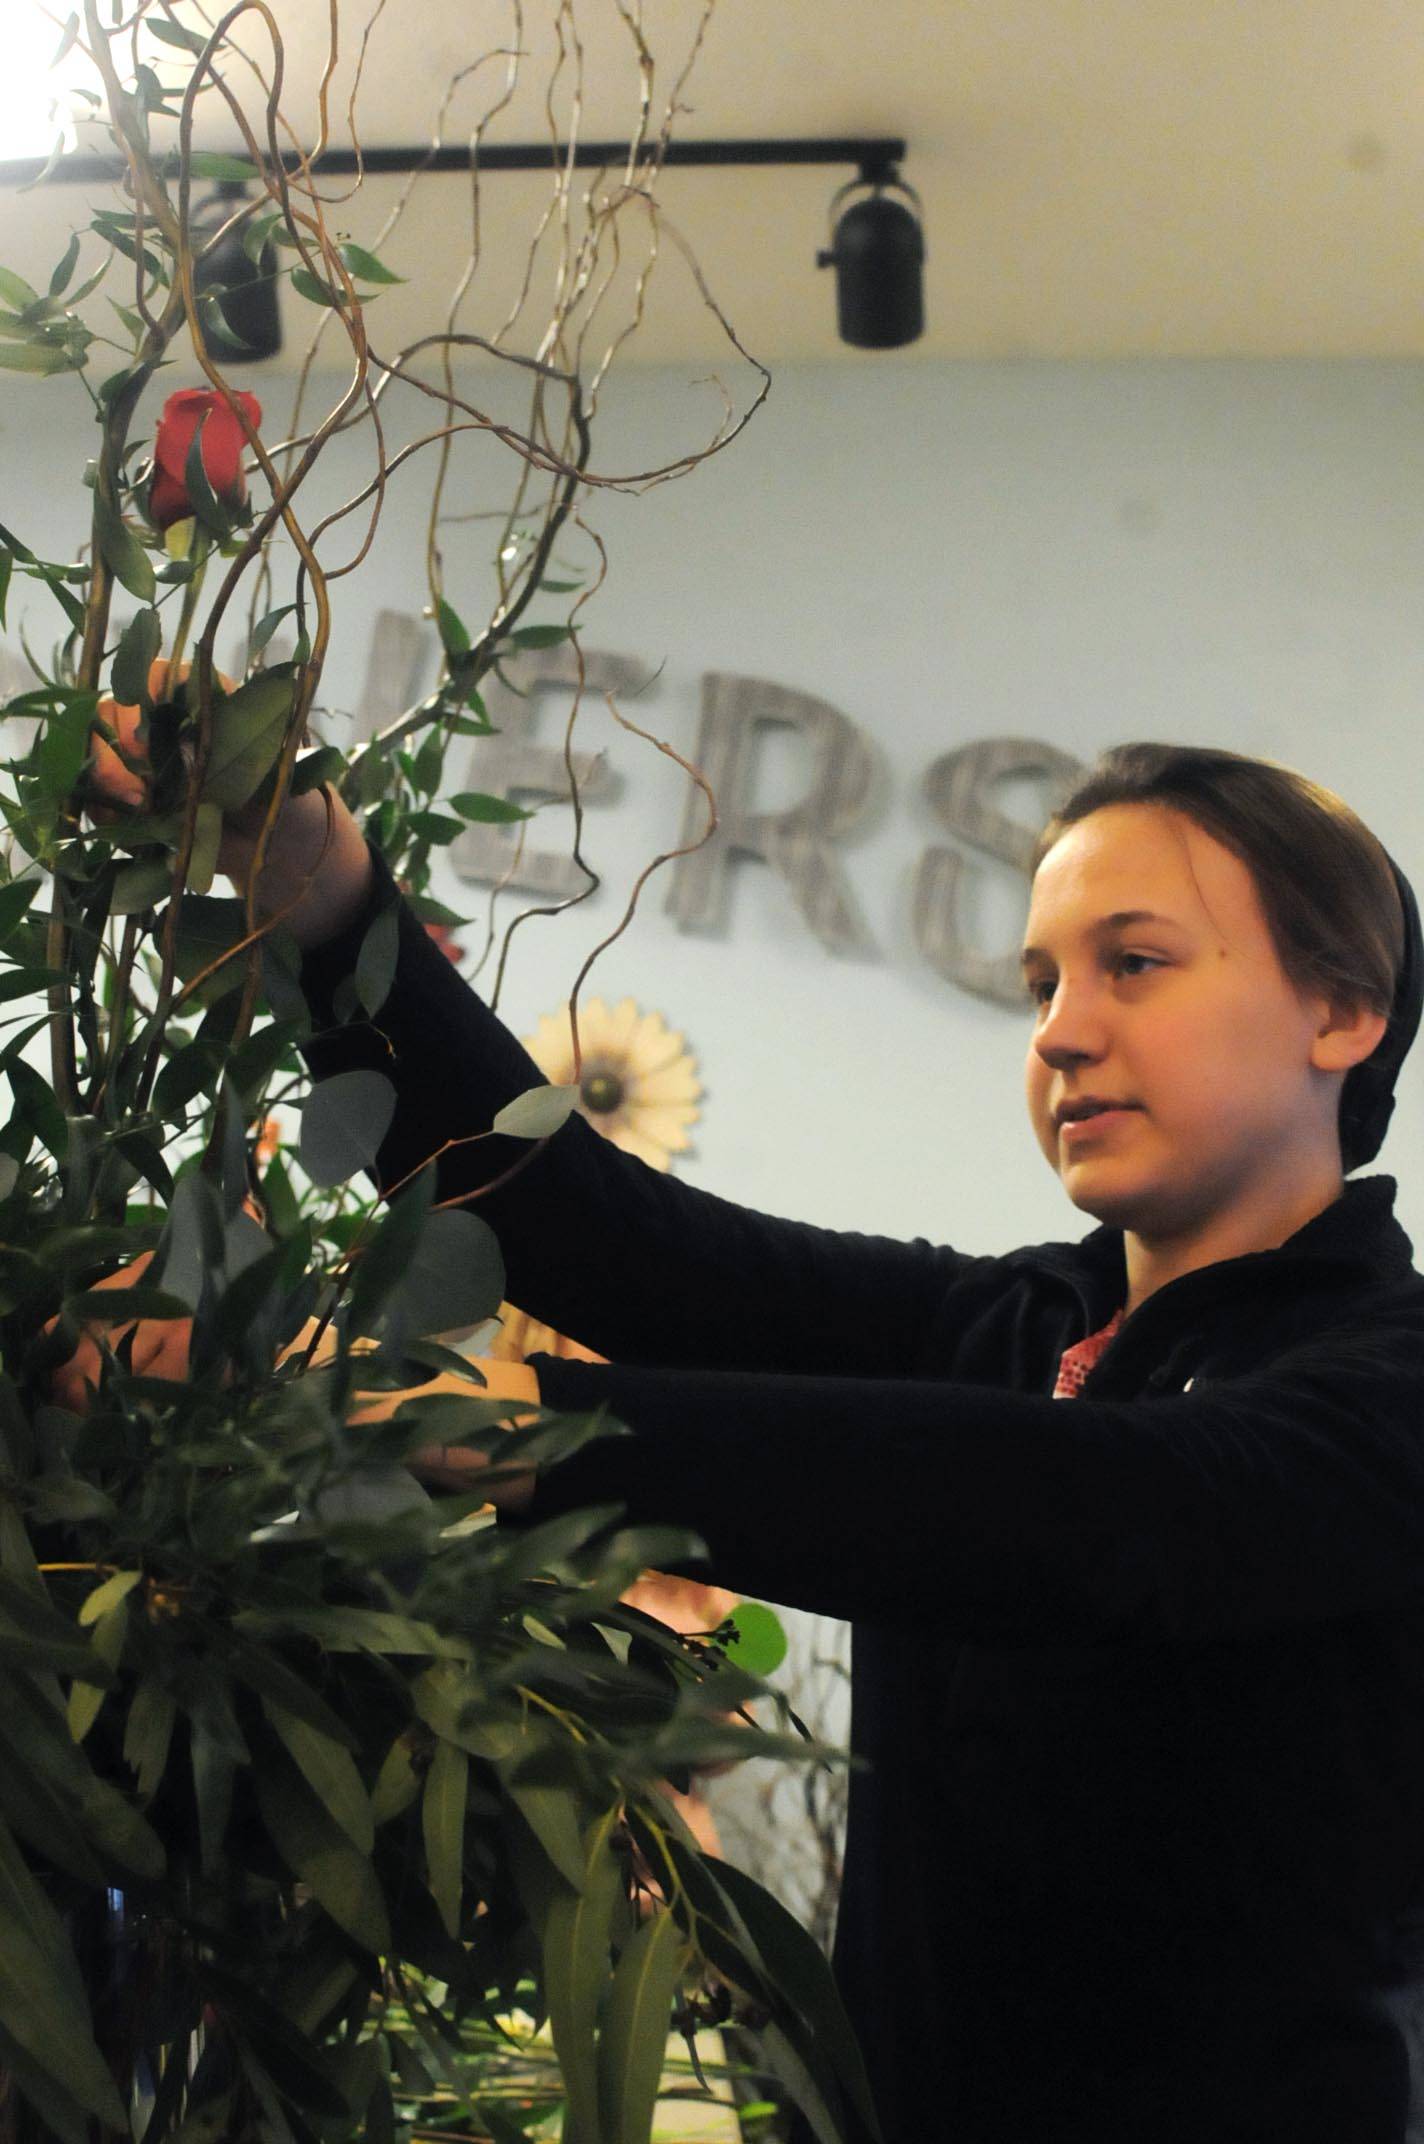 Kate’s Flowers and Gifts florist Kate Mastres arranges a bouquet at the shop on Wednesday, Feb. 14, 2018 in Soldotna, Alaska. Wednesday was a busy day for the shop, with the Valentine’s Day holiday. Mastres said she had been at the shop until 3:30 a.m. Wednesday morning preparing for the next day and arrived at 10 a.m. The shop does custom bouquets as well as some pre-designed ones, she said. (Photo by Elizabeth Earl/Peninsula Clarion)